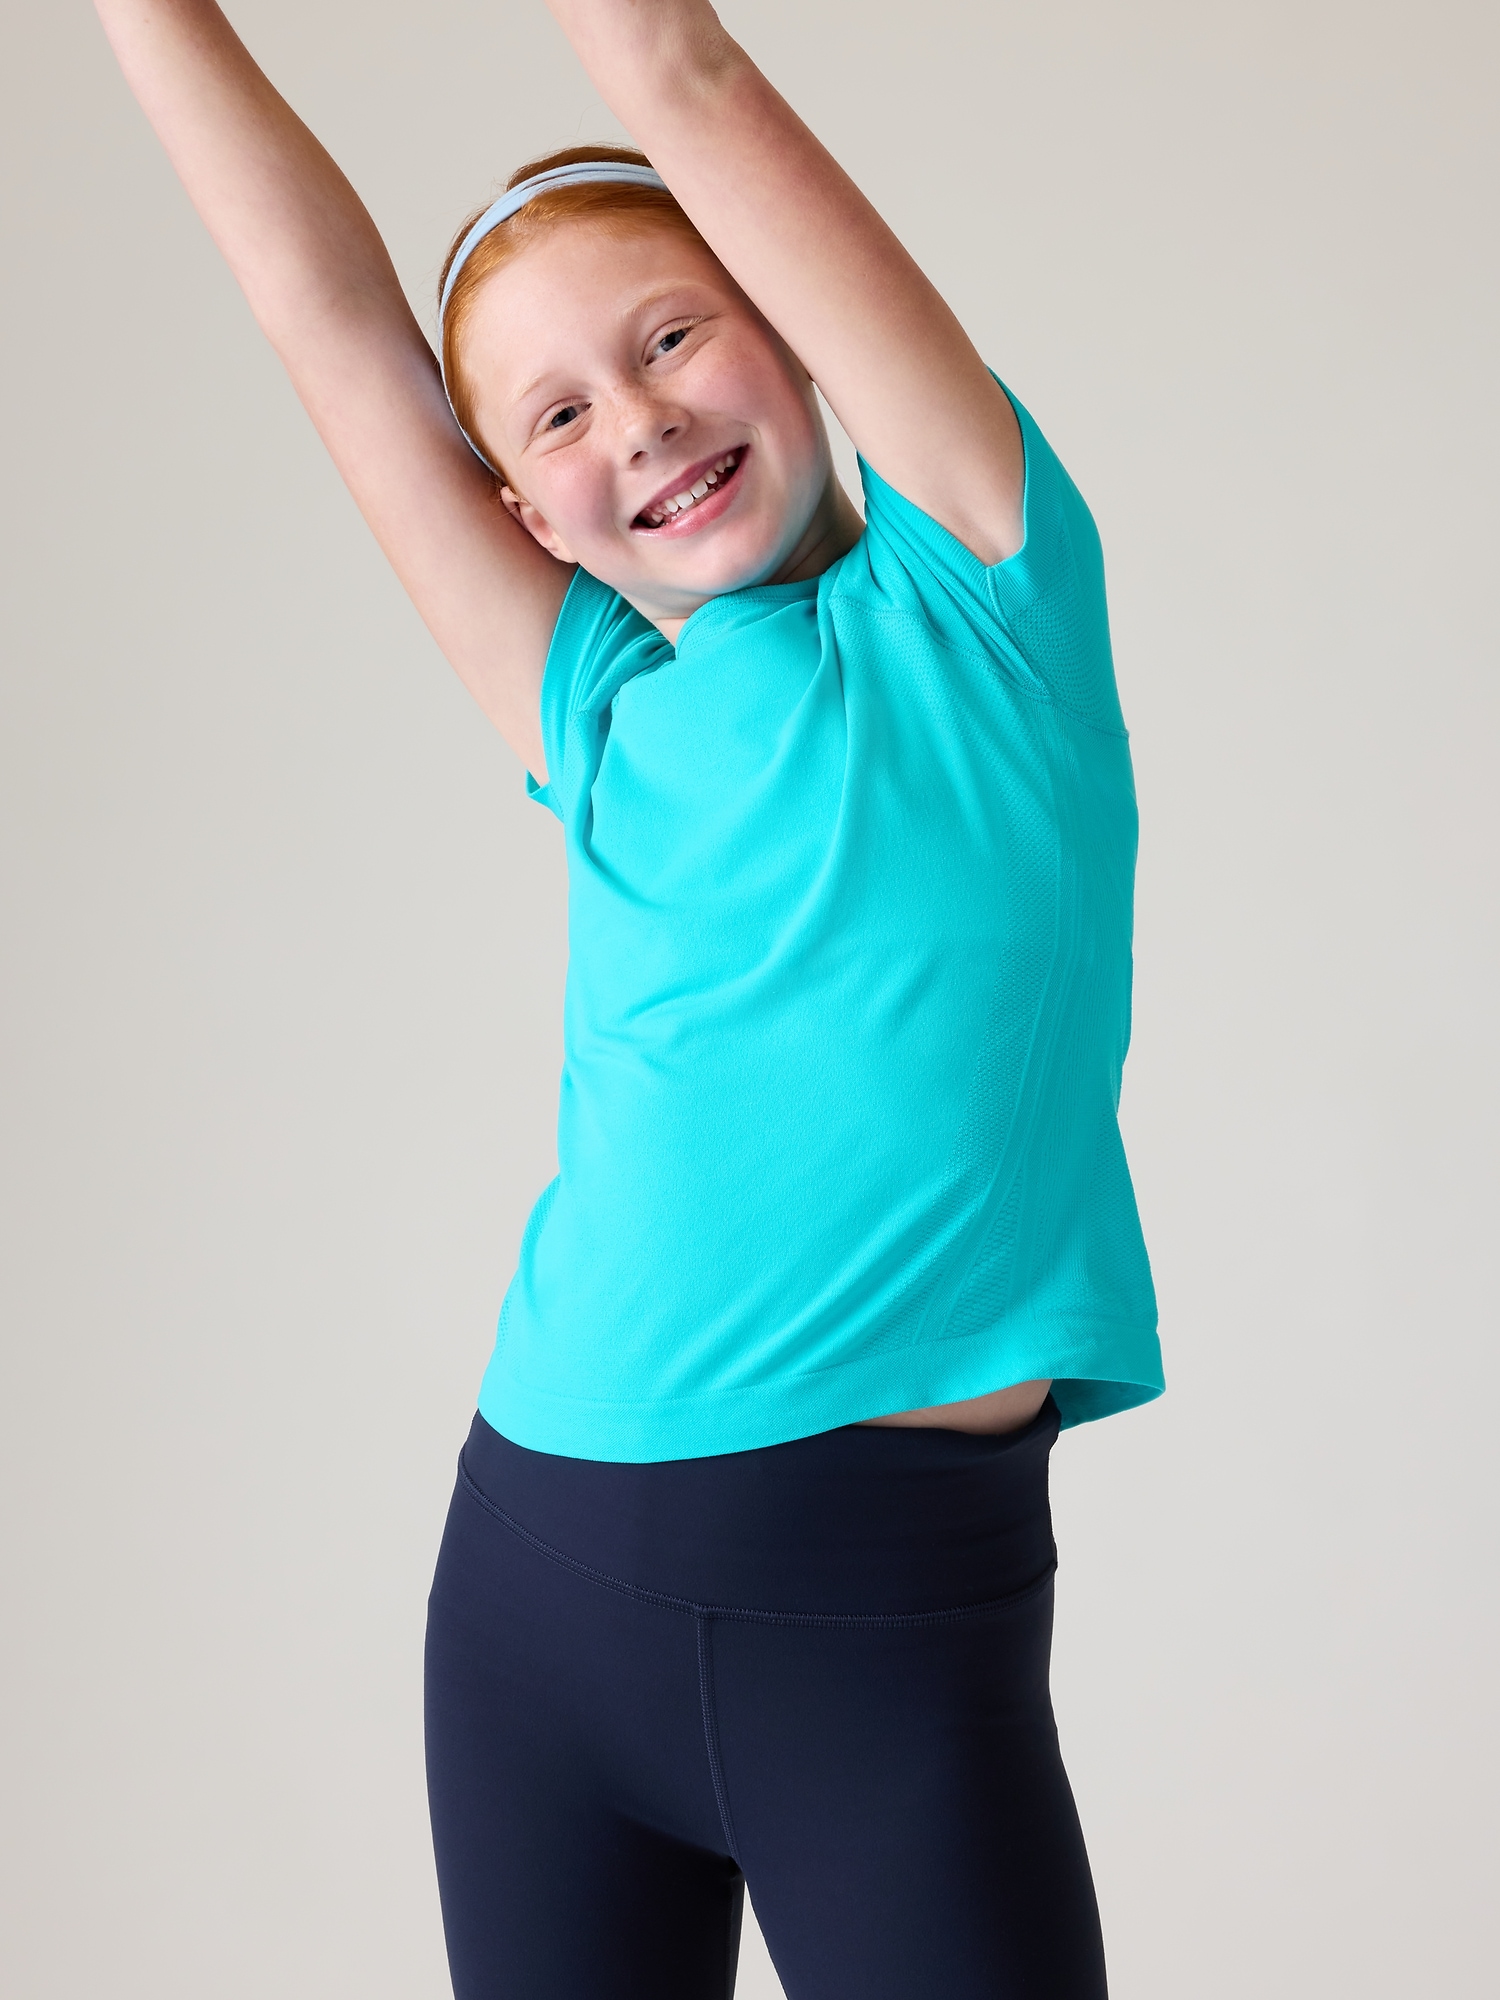 Athleta Multi-Color Tops & T-Shirts for Girls Sizes (4+)